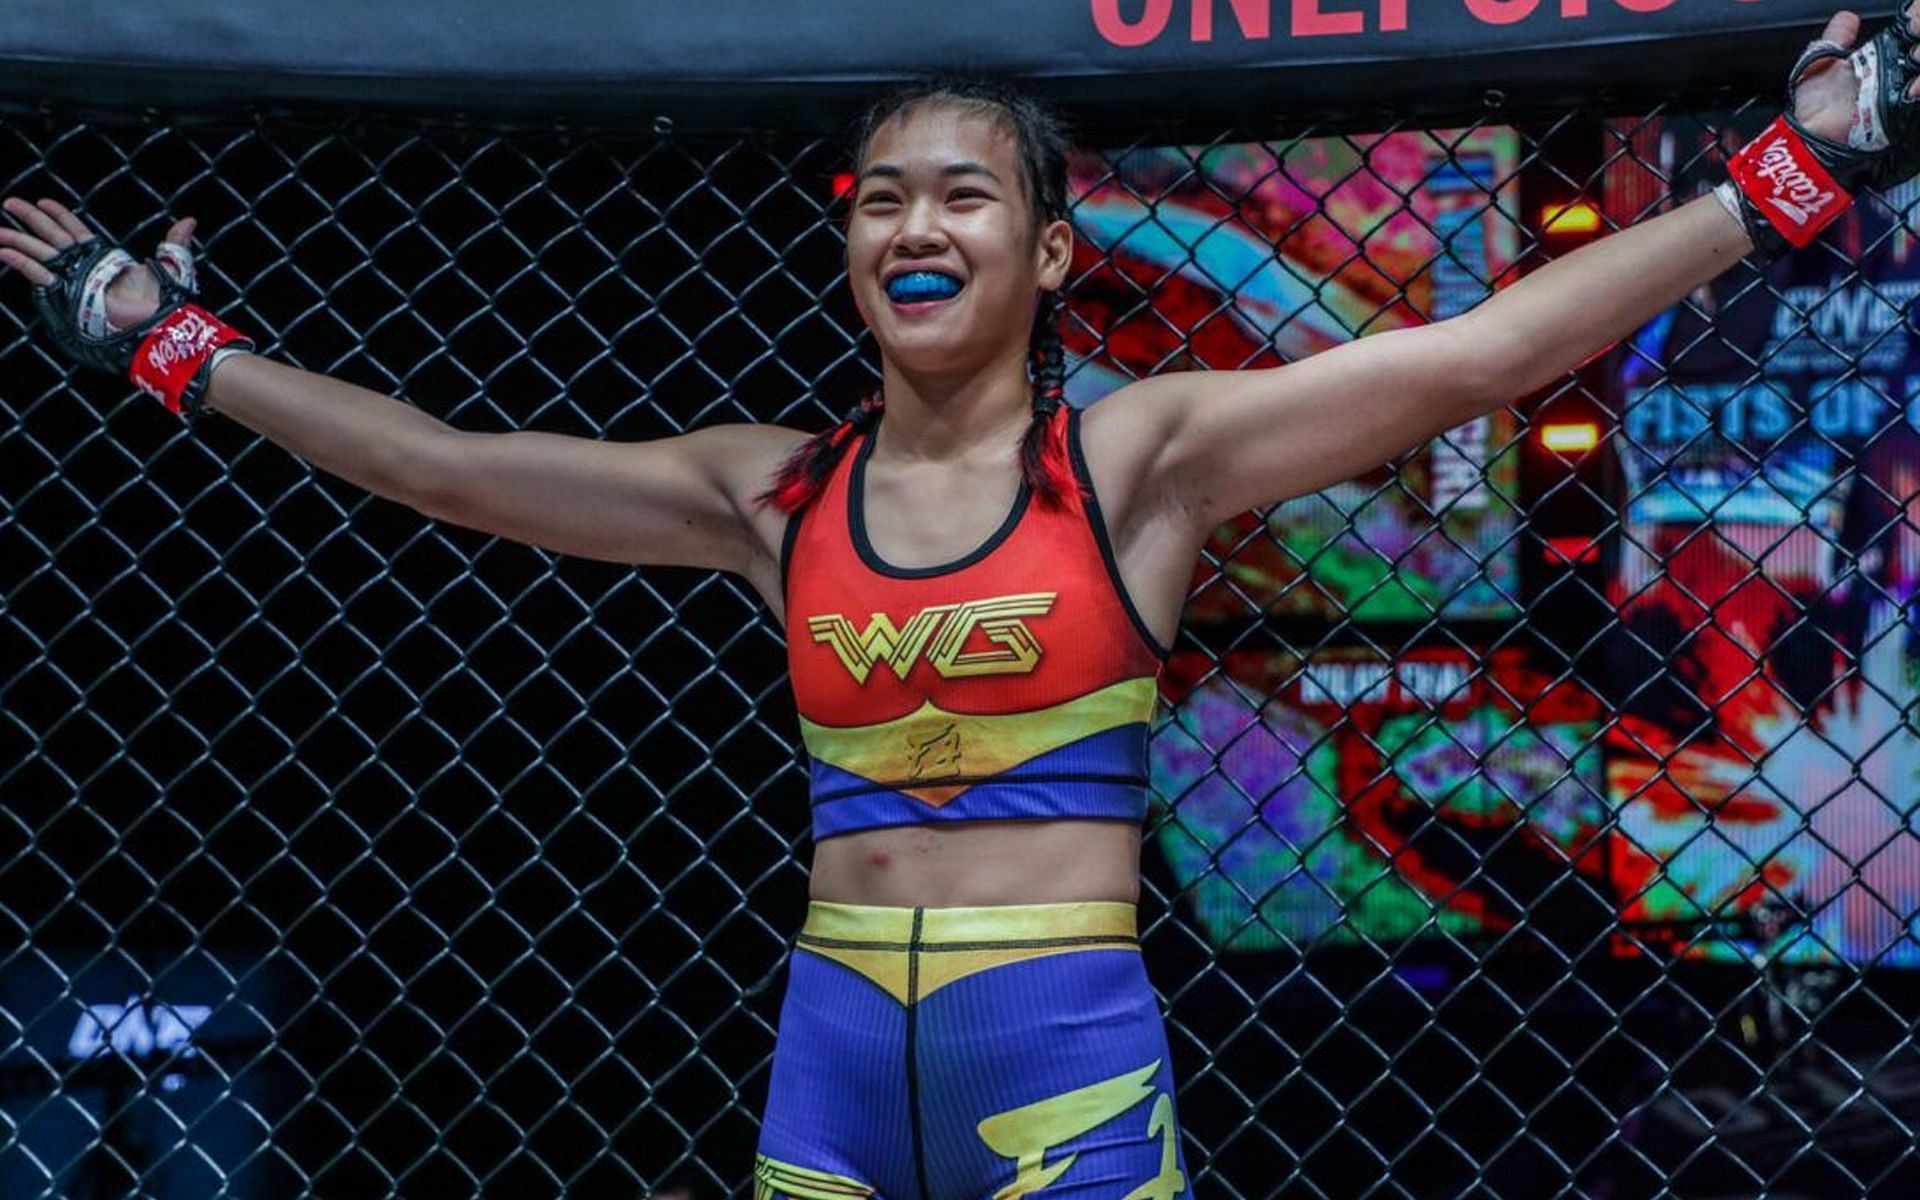 Nat Jaroonsak will be back in the circle in a different sport when she competes at ONE 157. | [Photo: ONE Championship]